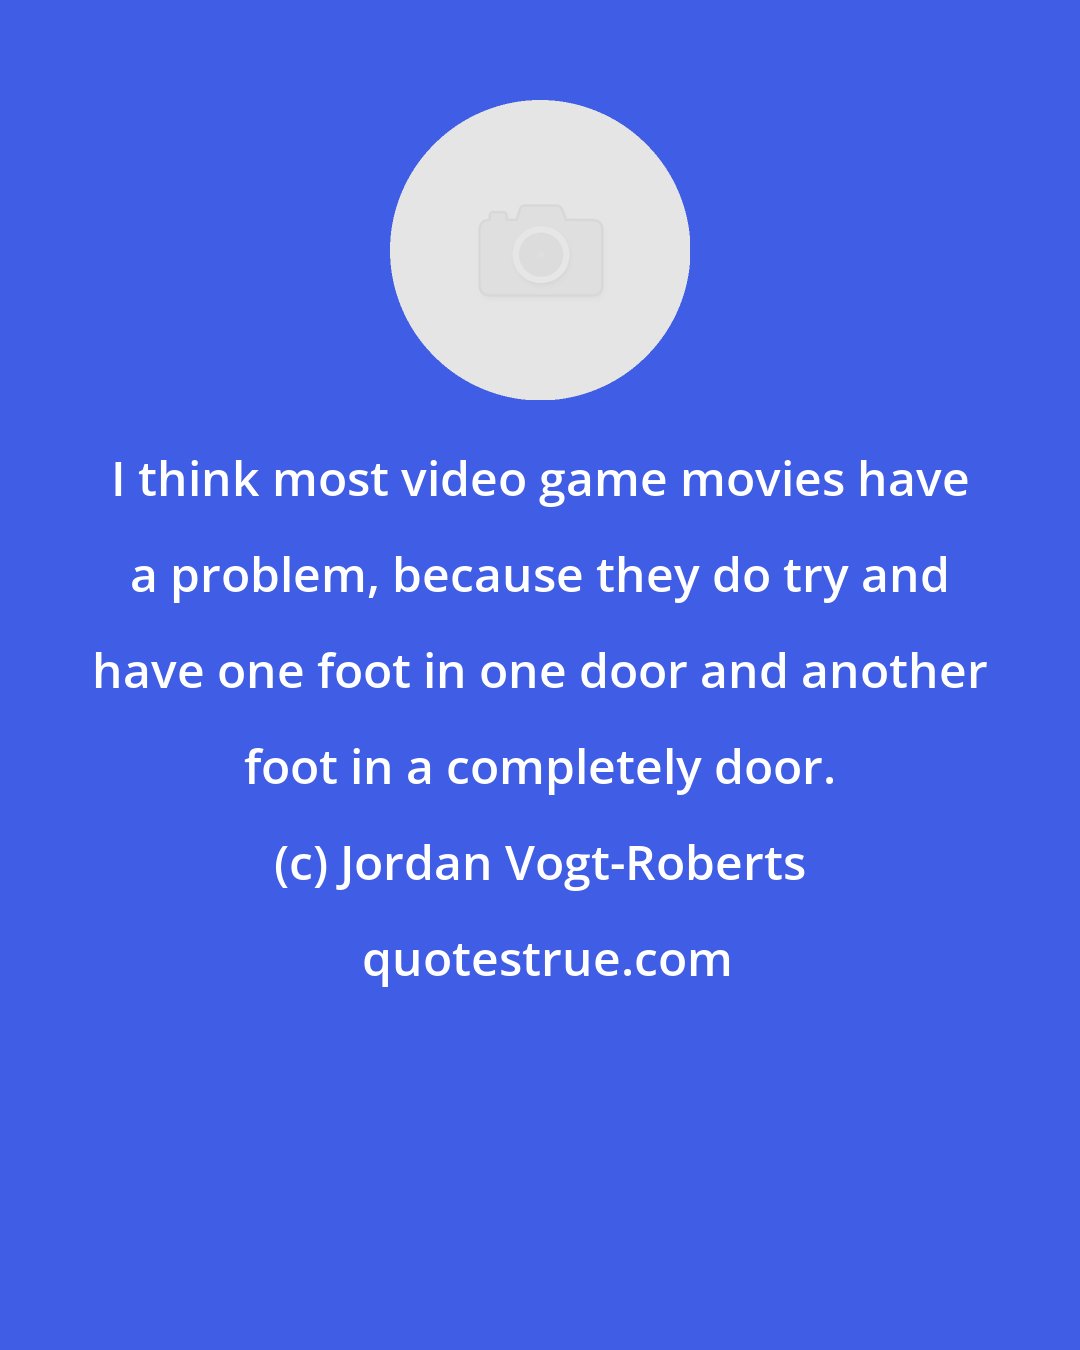 Jordan Vogt-Roberts: I think most video game movies have a problem, because they do try and have one foot in one door and another foot in a completely door.